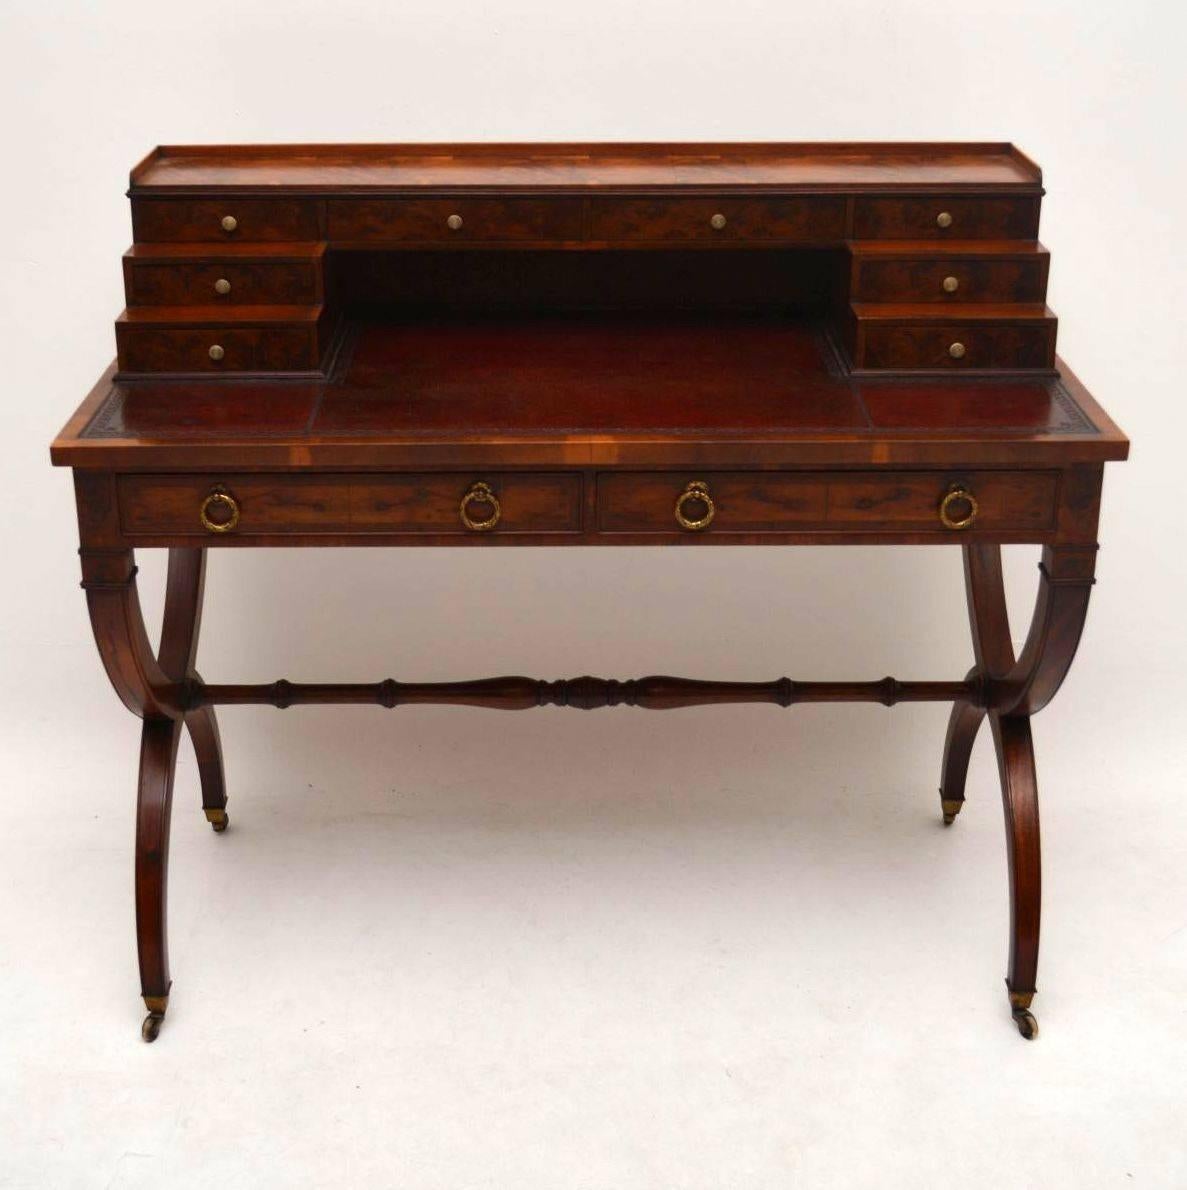 Antique yew wood and mahogany writing table desk of extremely fine quality & in good original condition, dating from around the 1910 period. The top section consists of an arrangement of stepped up small drawers with with simulated bone handles,